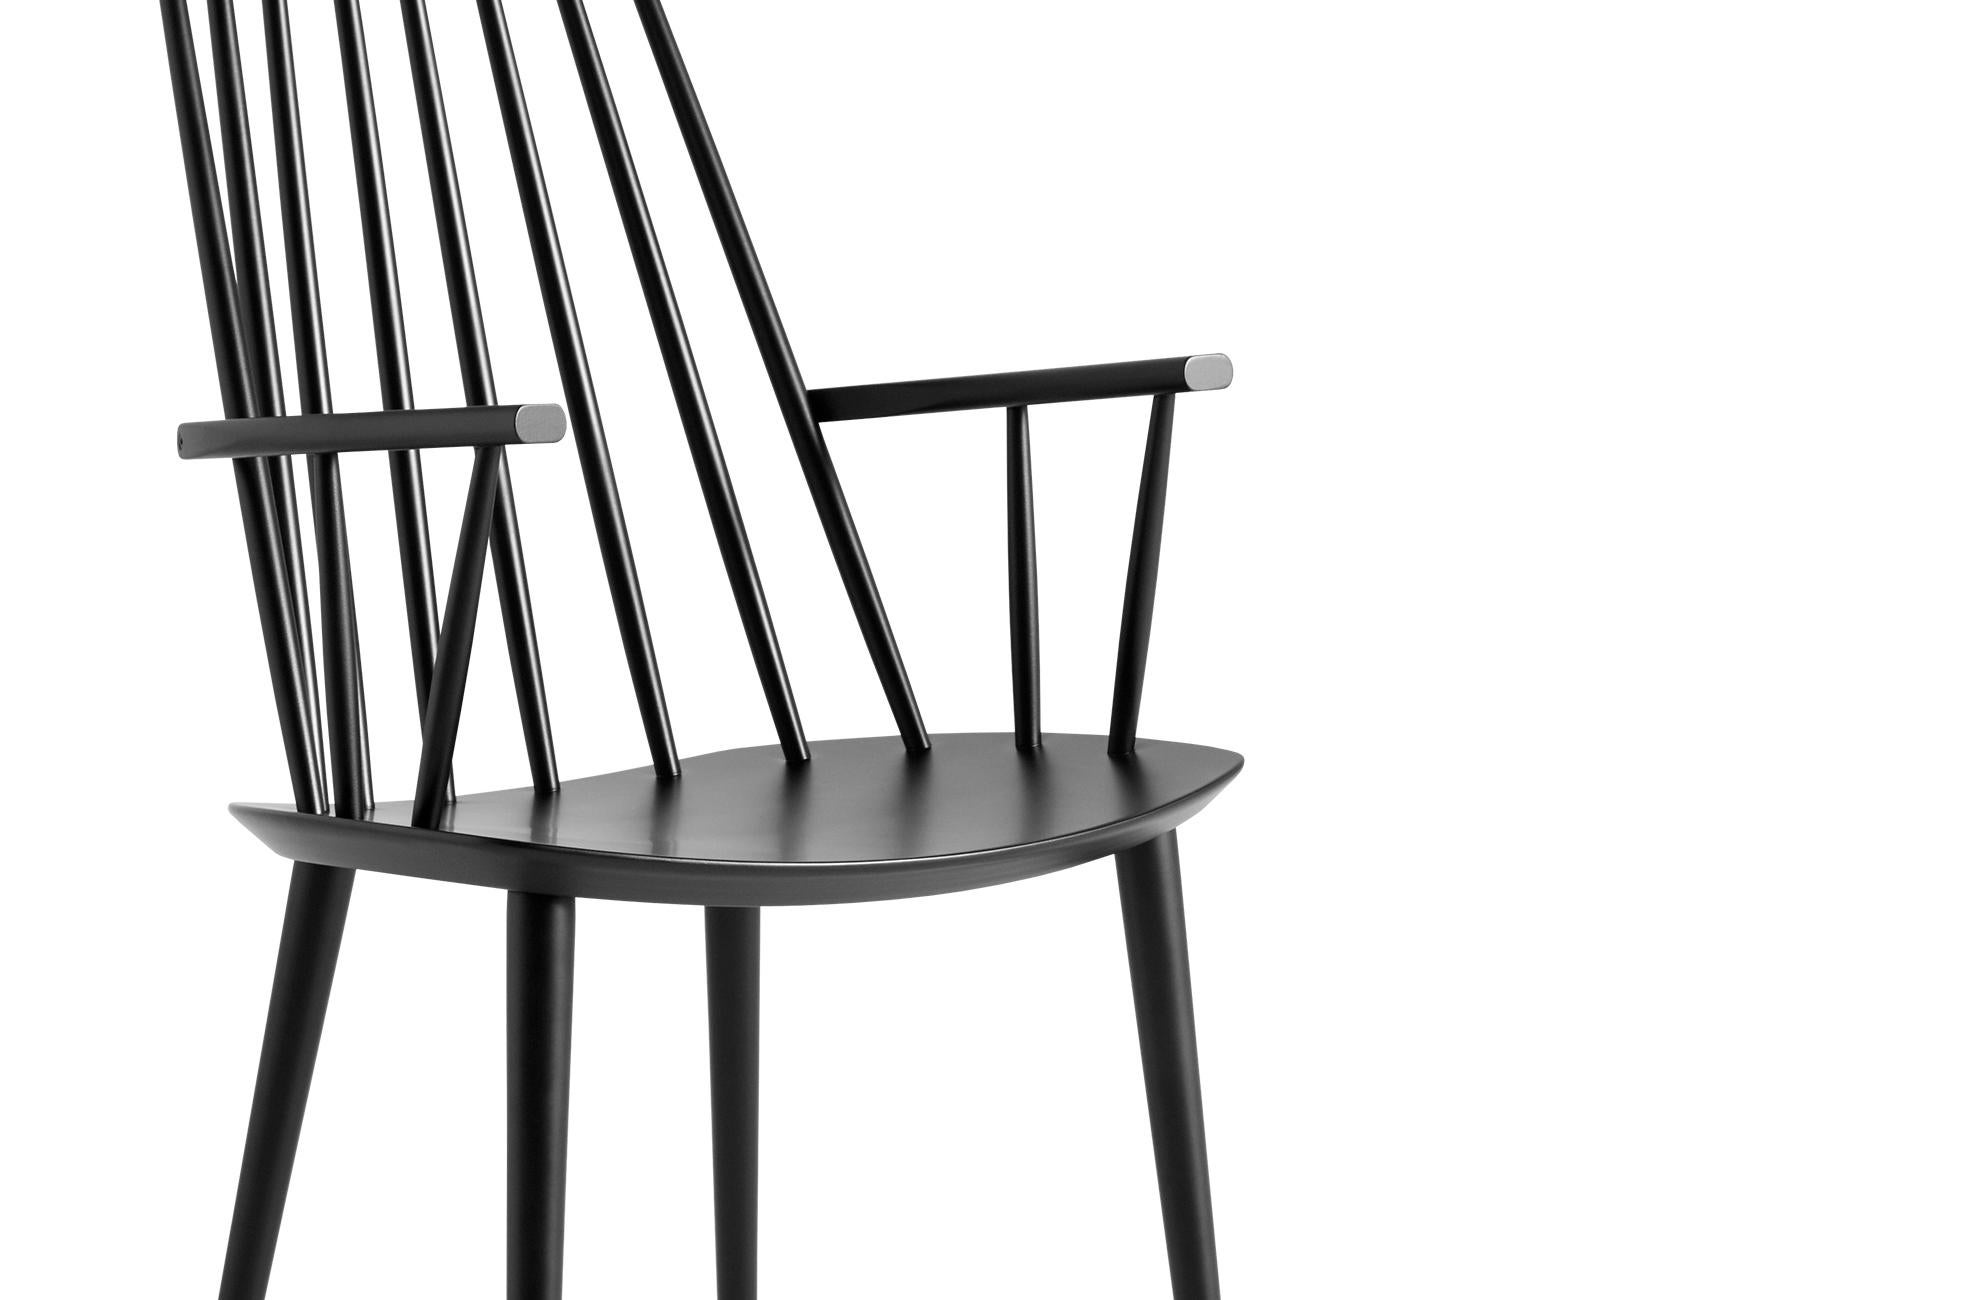 With the comfort of a lounge chair and the functionality of a dining chair by Poul M. Volther’s J110 chair offers equal measures of strong aesthetics and practicality. Long rods at the back and curved armrests create an inviting expression. Crafted